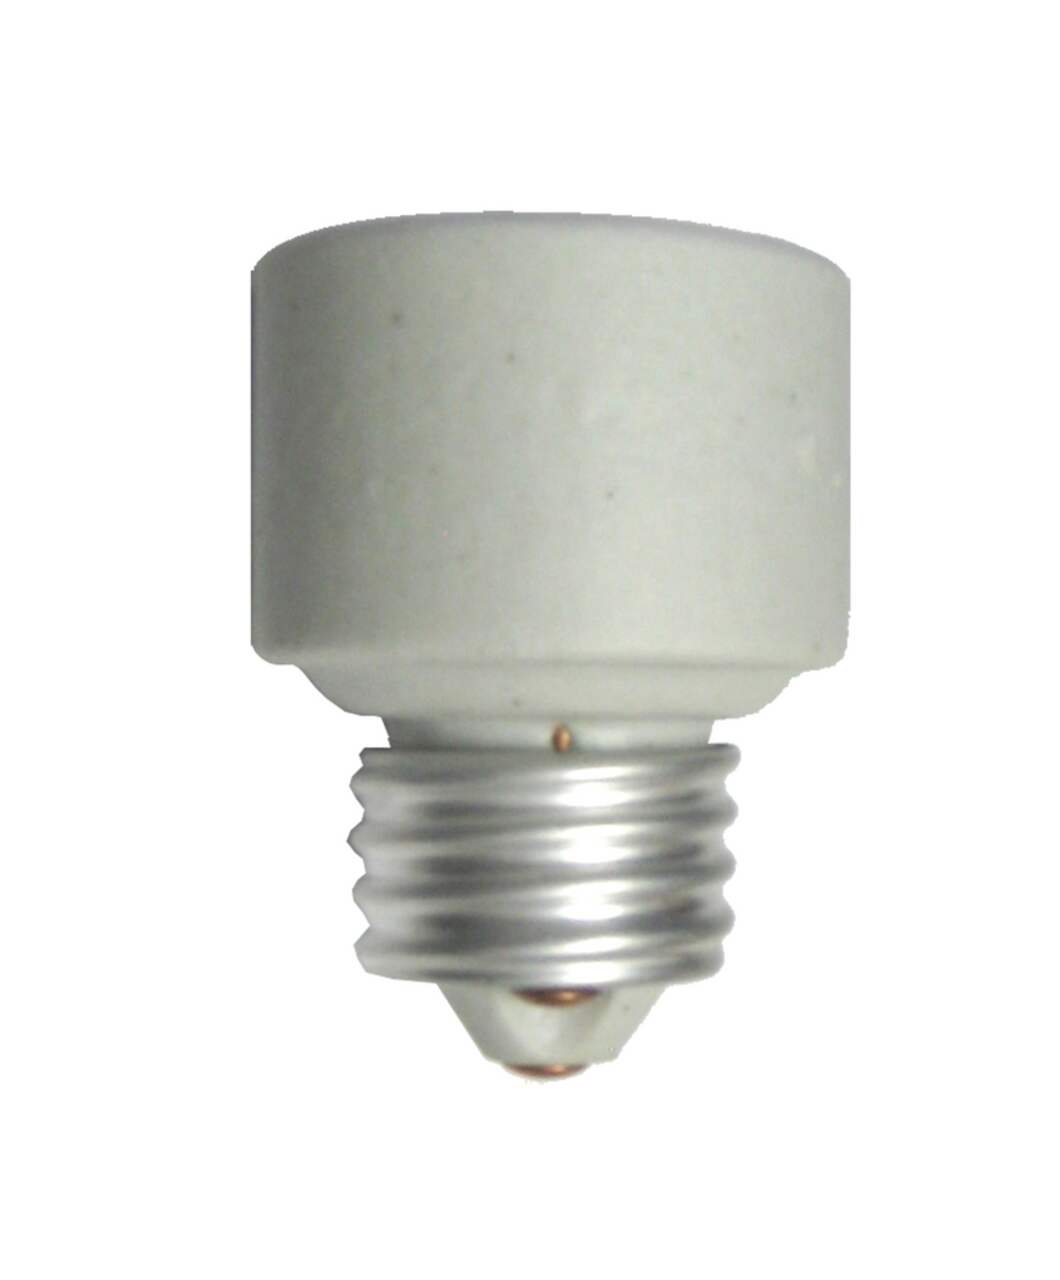 https://media-www.canadiantire.ca/product/fixing/electrical/rough-electrical/0522837/socket-adapter-phenolic-medium-87450bdd-d4f1-4919-84ce-75bbde8e003e.png?imdensity=1&imwidth=640&impolicy=mZoom